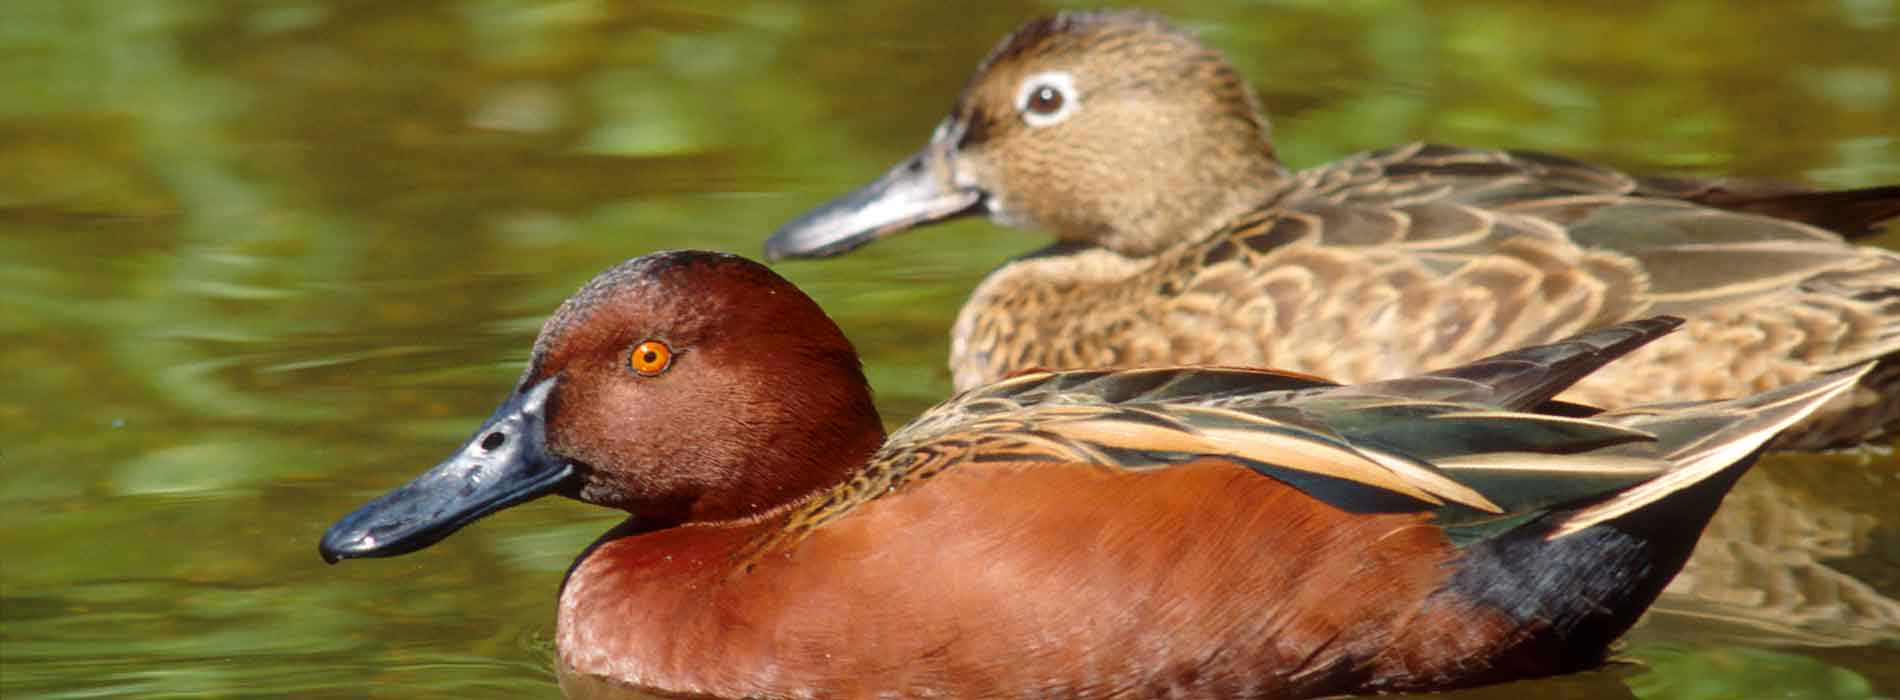 A cinnamon teal on the surface of the water with foliage in background